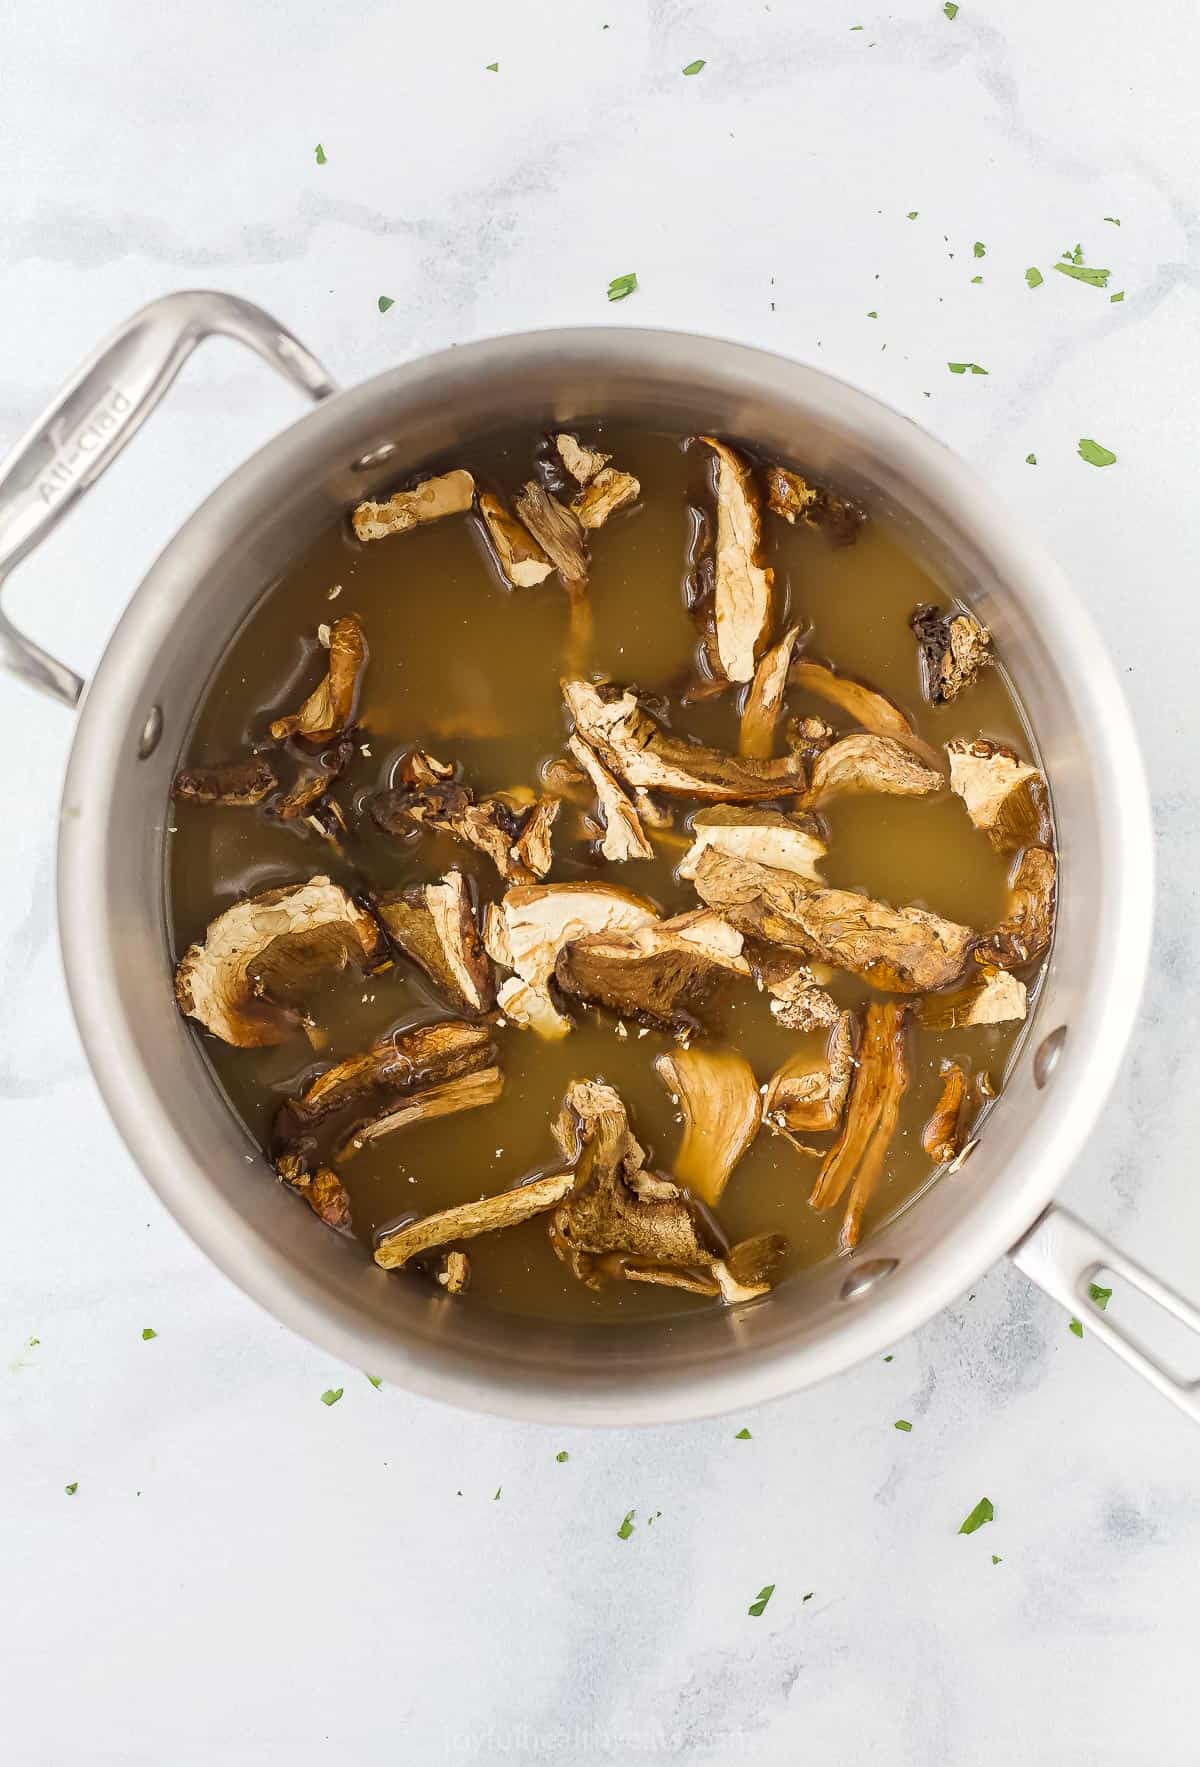 A saucepan filled with broth and dried porcini mushrooms